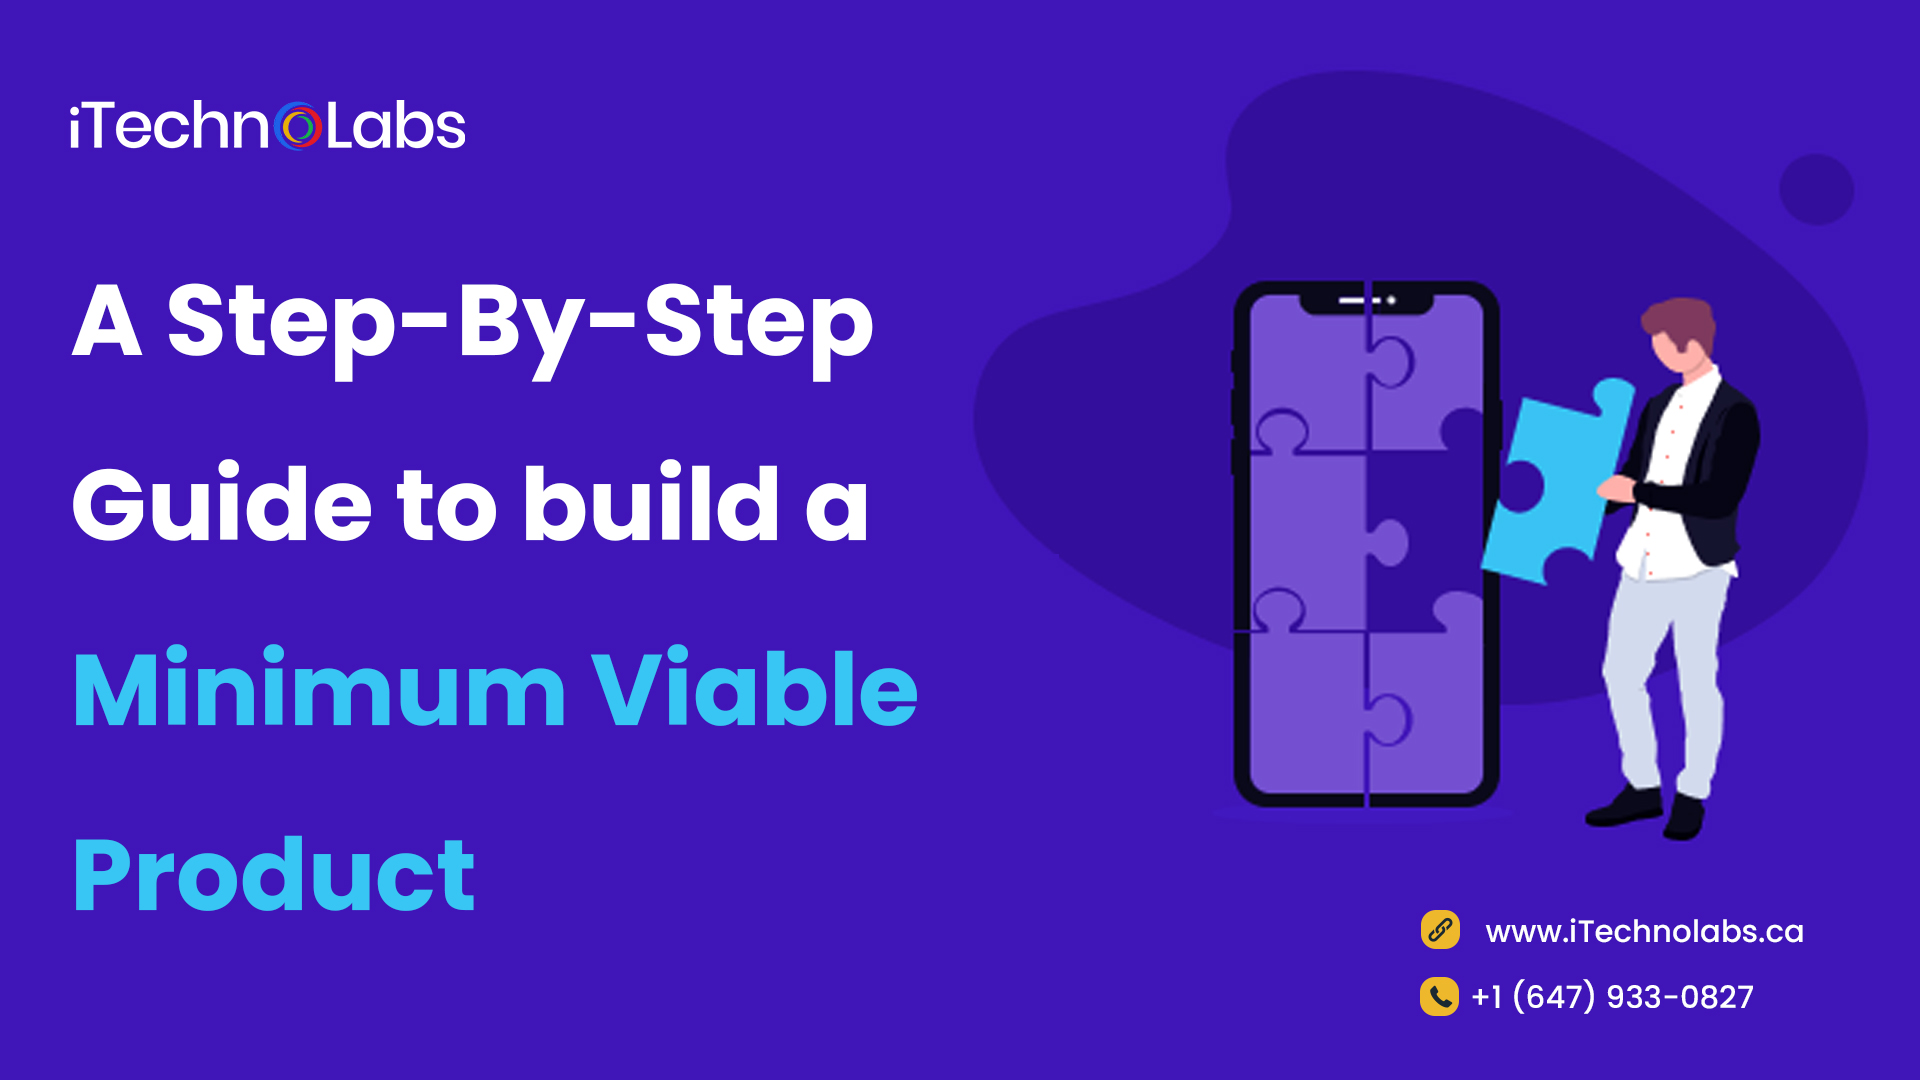 step-by-step guide to build a minimum viable product itechnolabs